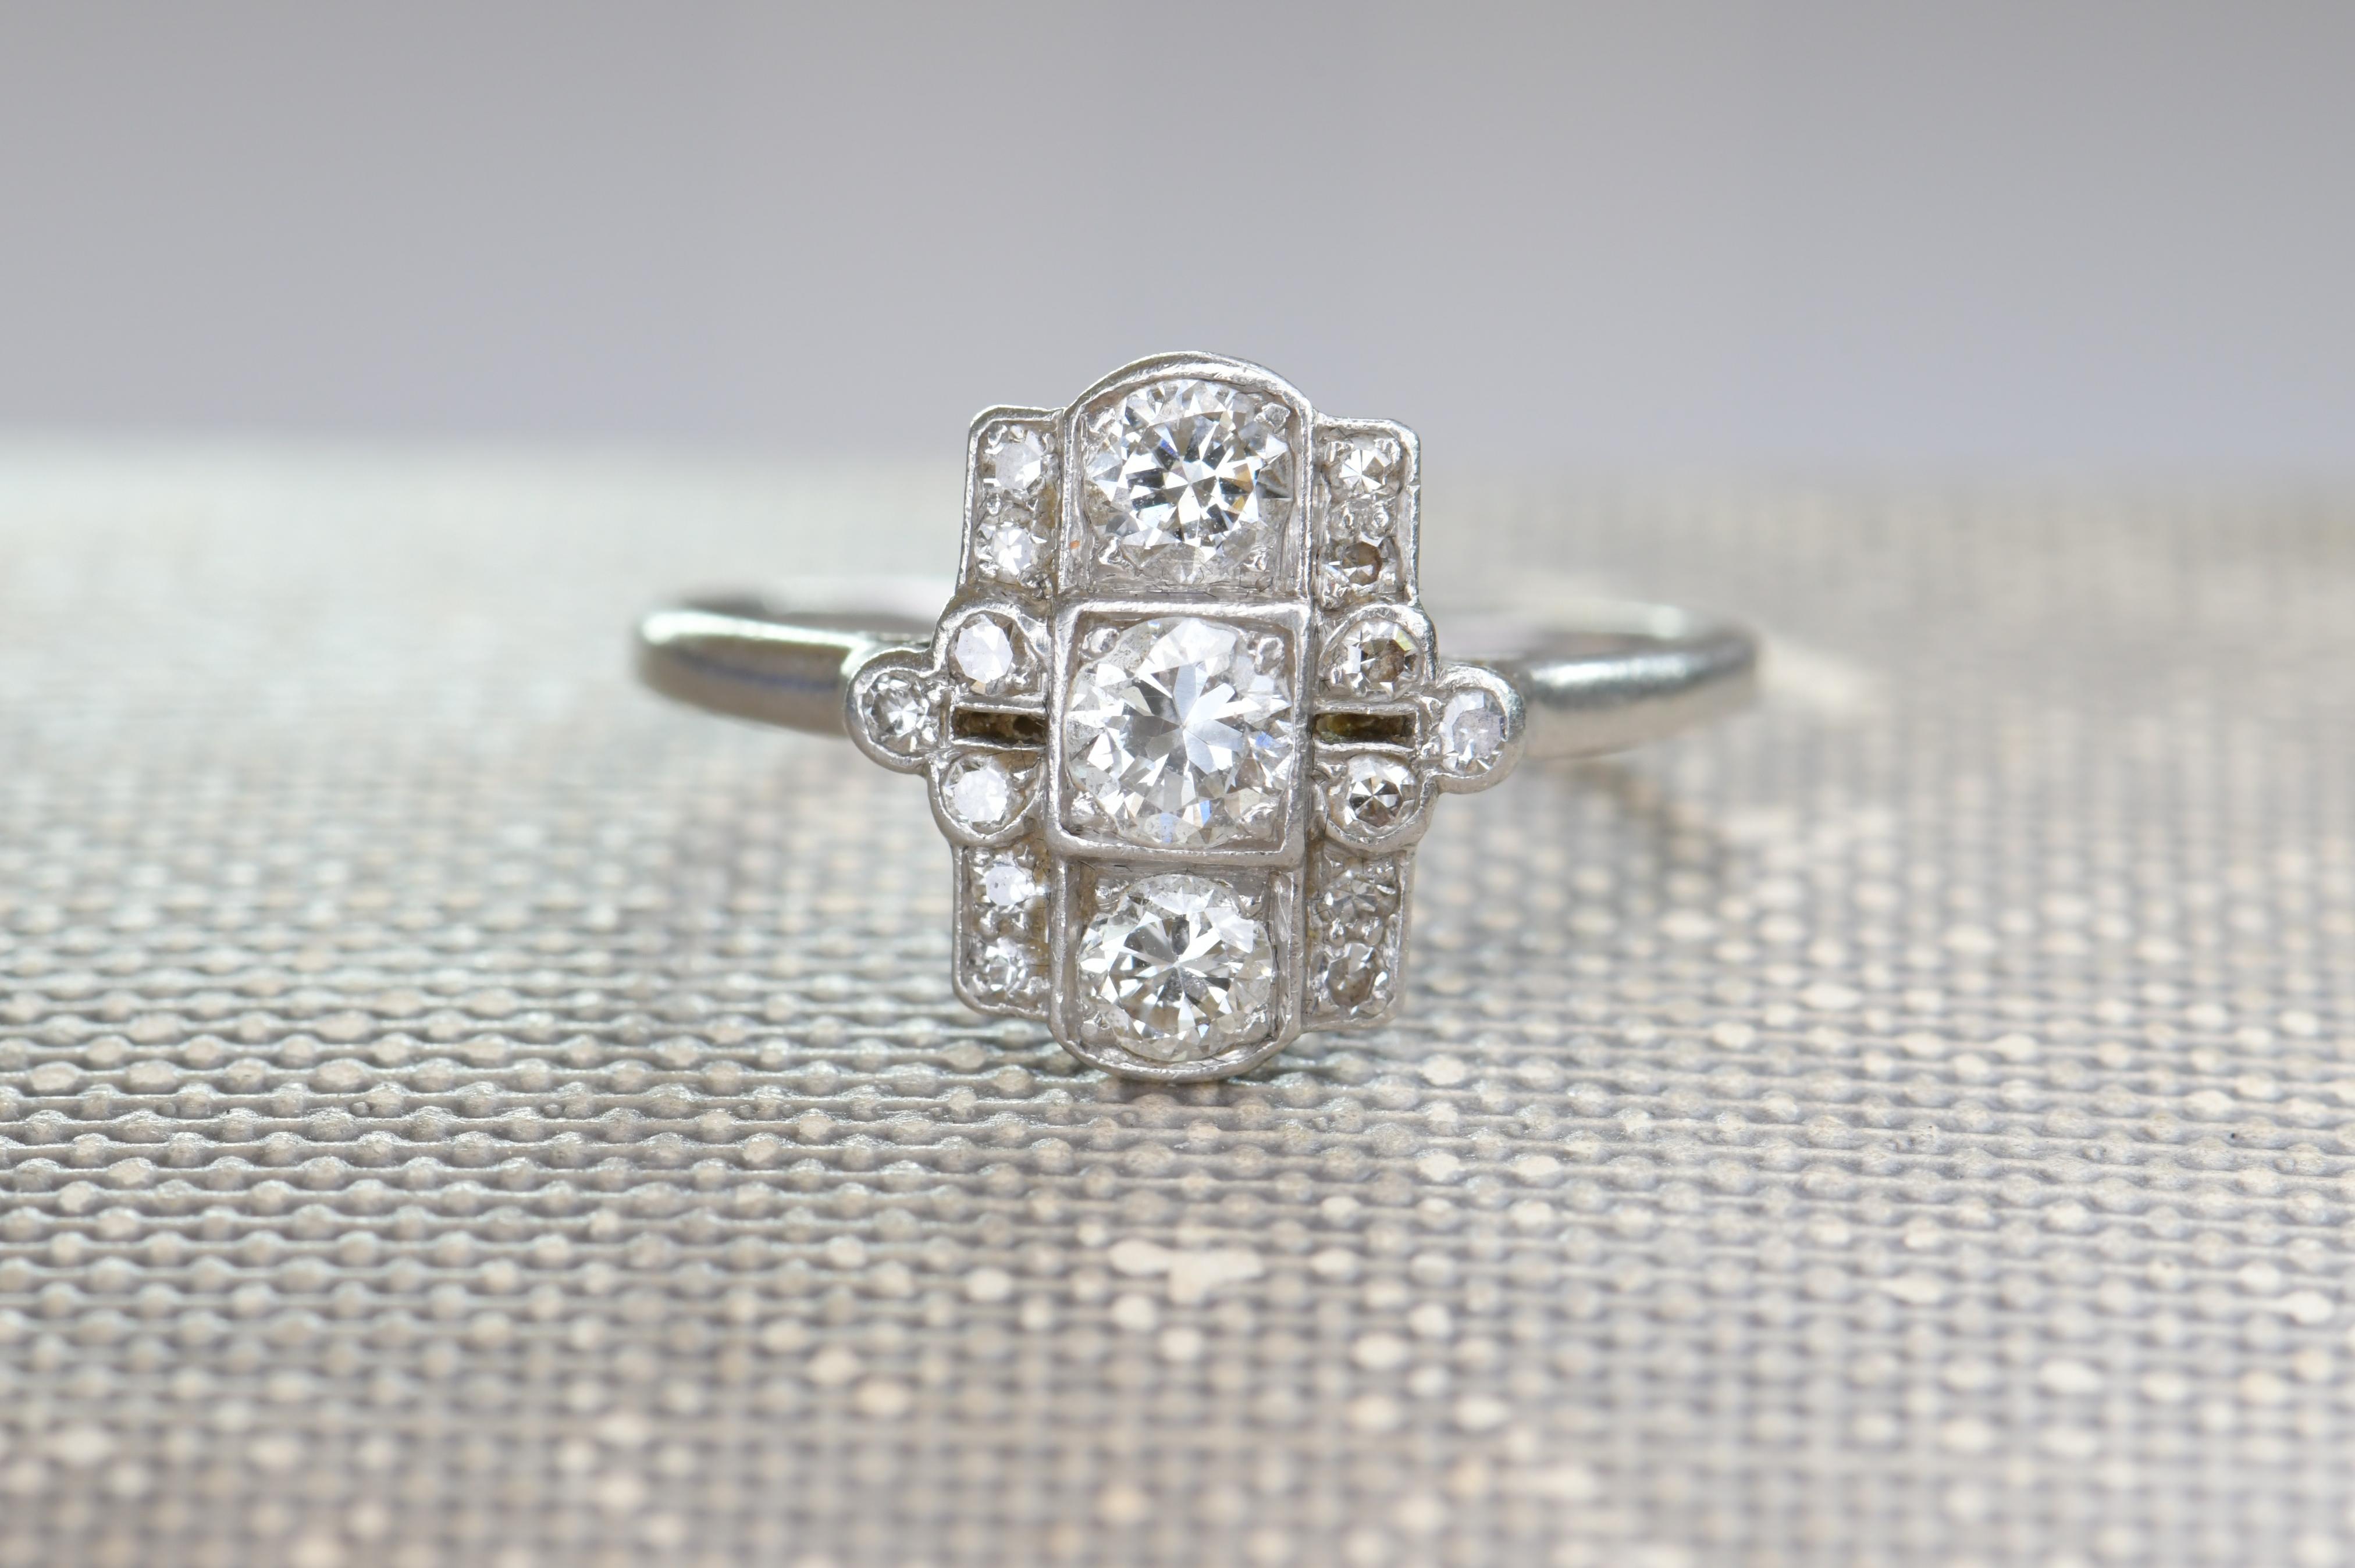 A wonderful platinum ring that is typical of the Art Deco period with it’s smart design. It is a pleasing rectangle shape that is very flattering to the finger when worn. Down the center are set three well matched white diamonds in open settings.